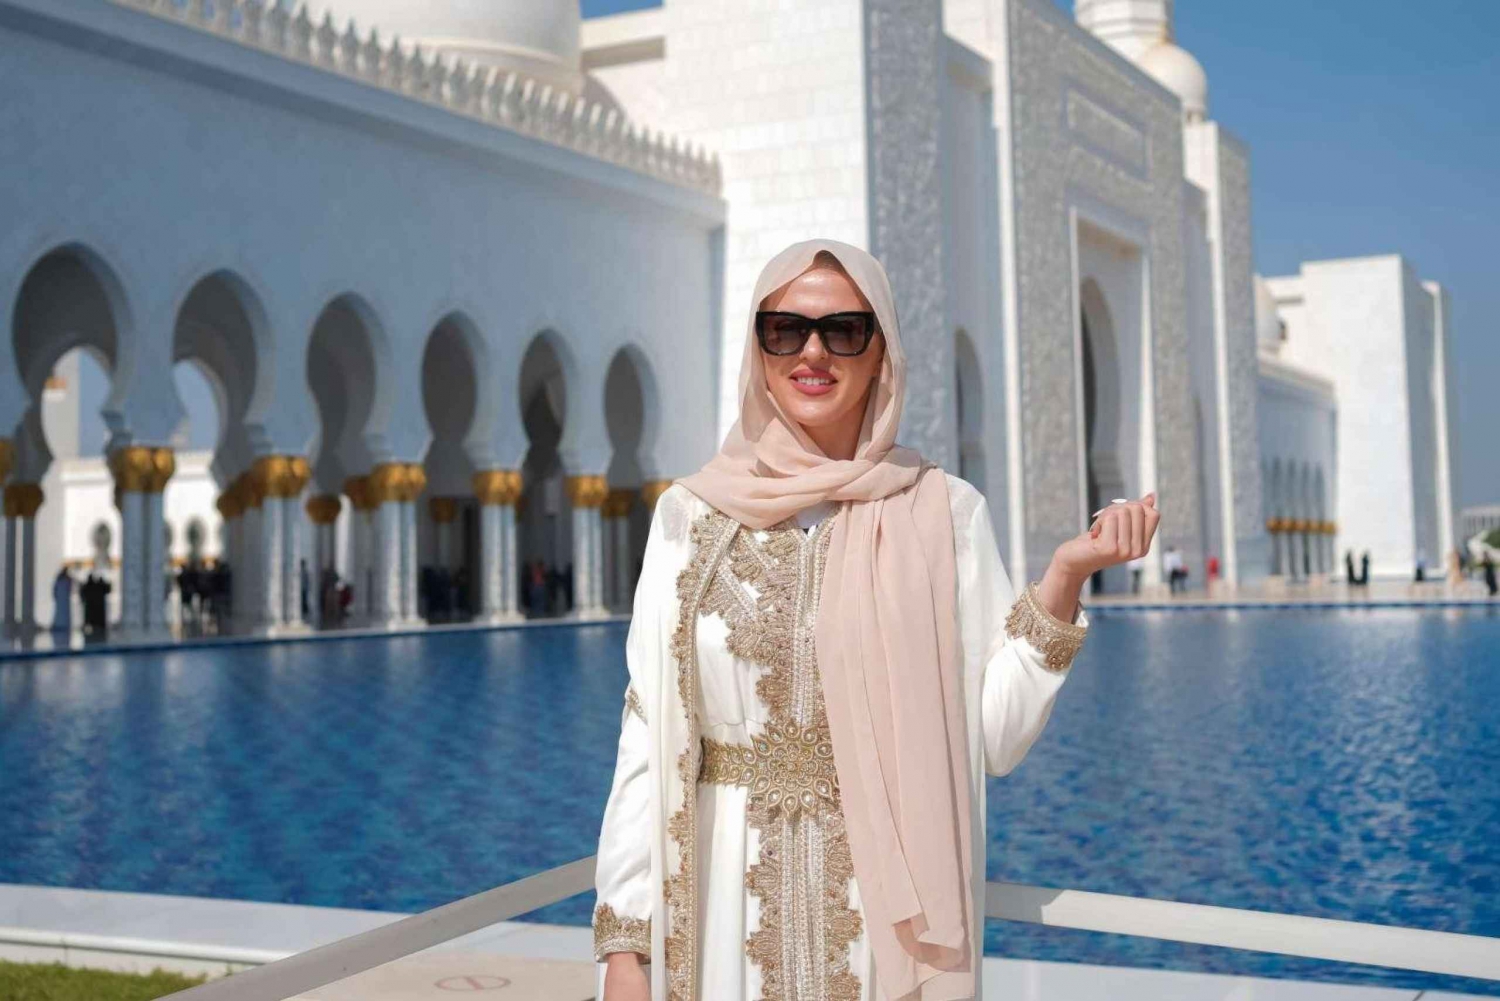 Abu Dhabi Full Day Sightseeing Tour with Mosque From Dubai